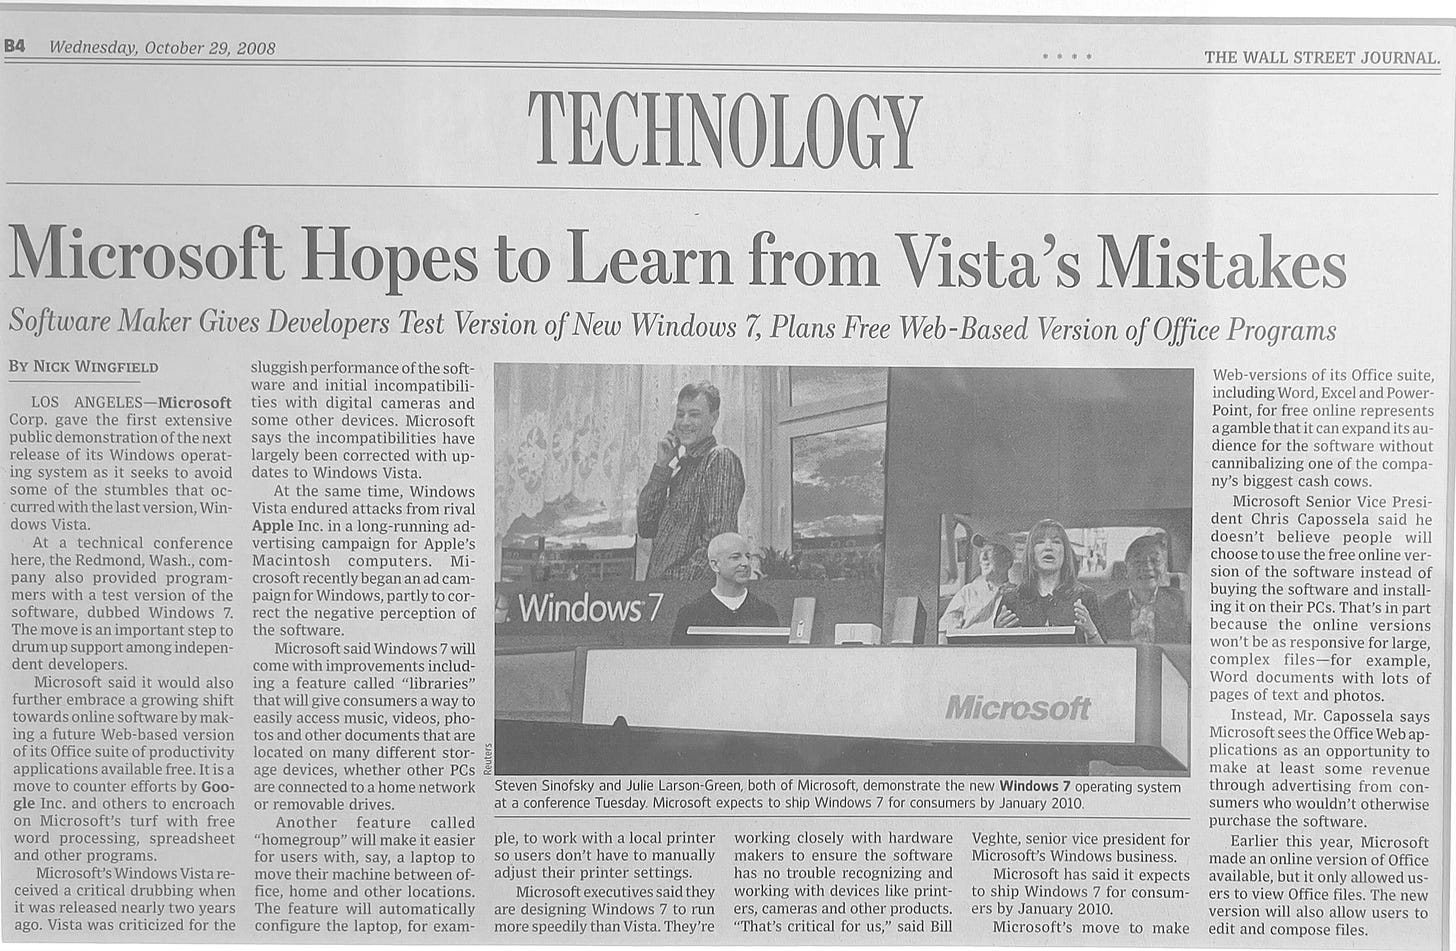 Microsoft Hopes to Learn from Vista's Mistakes Software Maker Gives Developers Test Version of New Windows 7, Plans Free Web-Based Version of Office Programs  Oct. 29, 2008 at 12:01 am ET LOS ANGELES -- Microsoft Corp. MSFT -0.26%▼ gave the first extensive public demonstration of the next release of its Windows operating system as it seeks to avoid some of the stumbles that occurred with the last version, Windows Vista.  At a technical conference here, the Redmond, Wash., company also provided programmers with a test version of the software, dubbed Windows 7. The move is an important step to drum up support among independent developers.